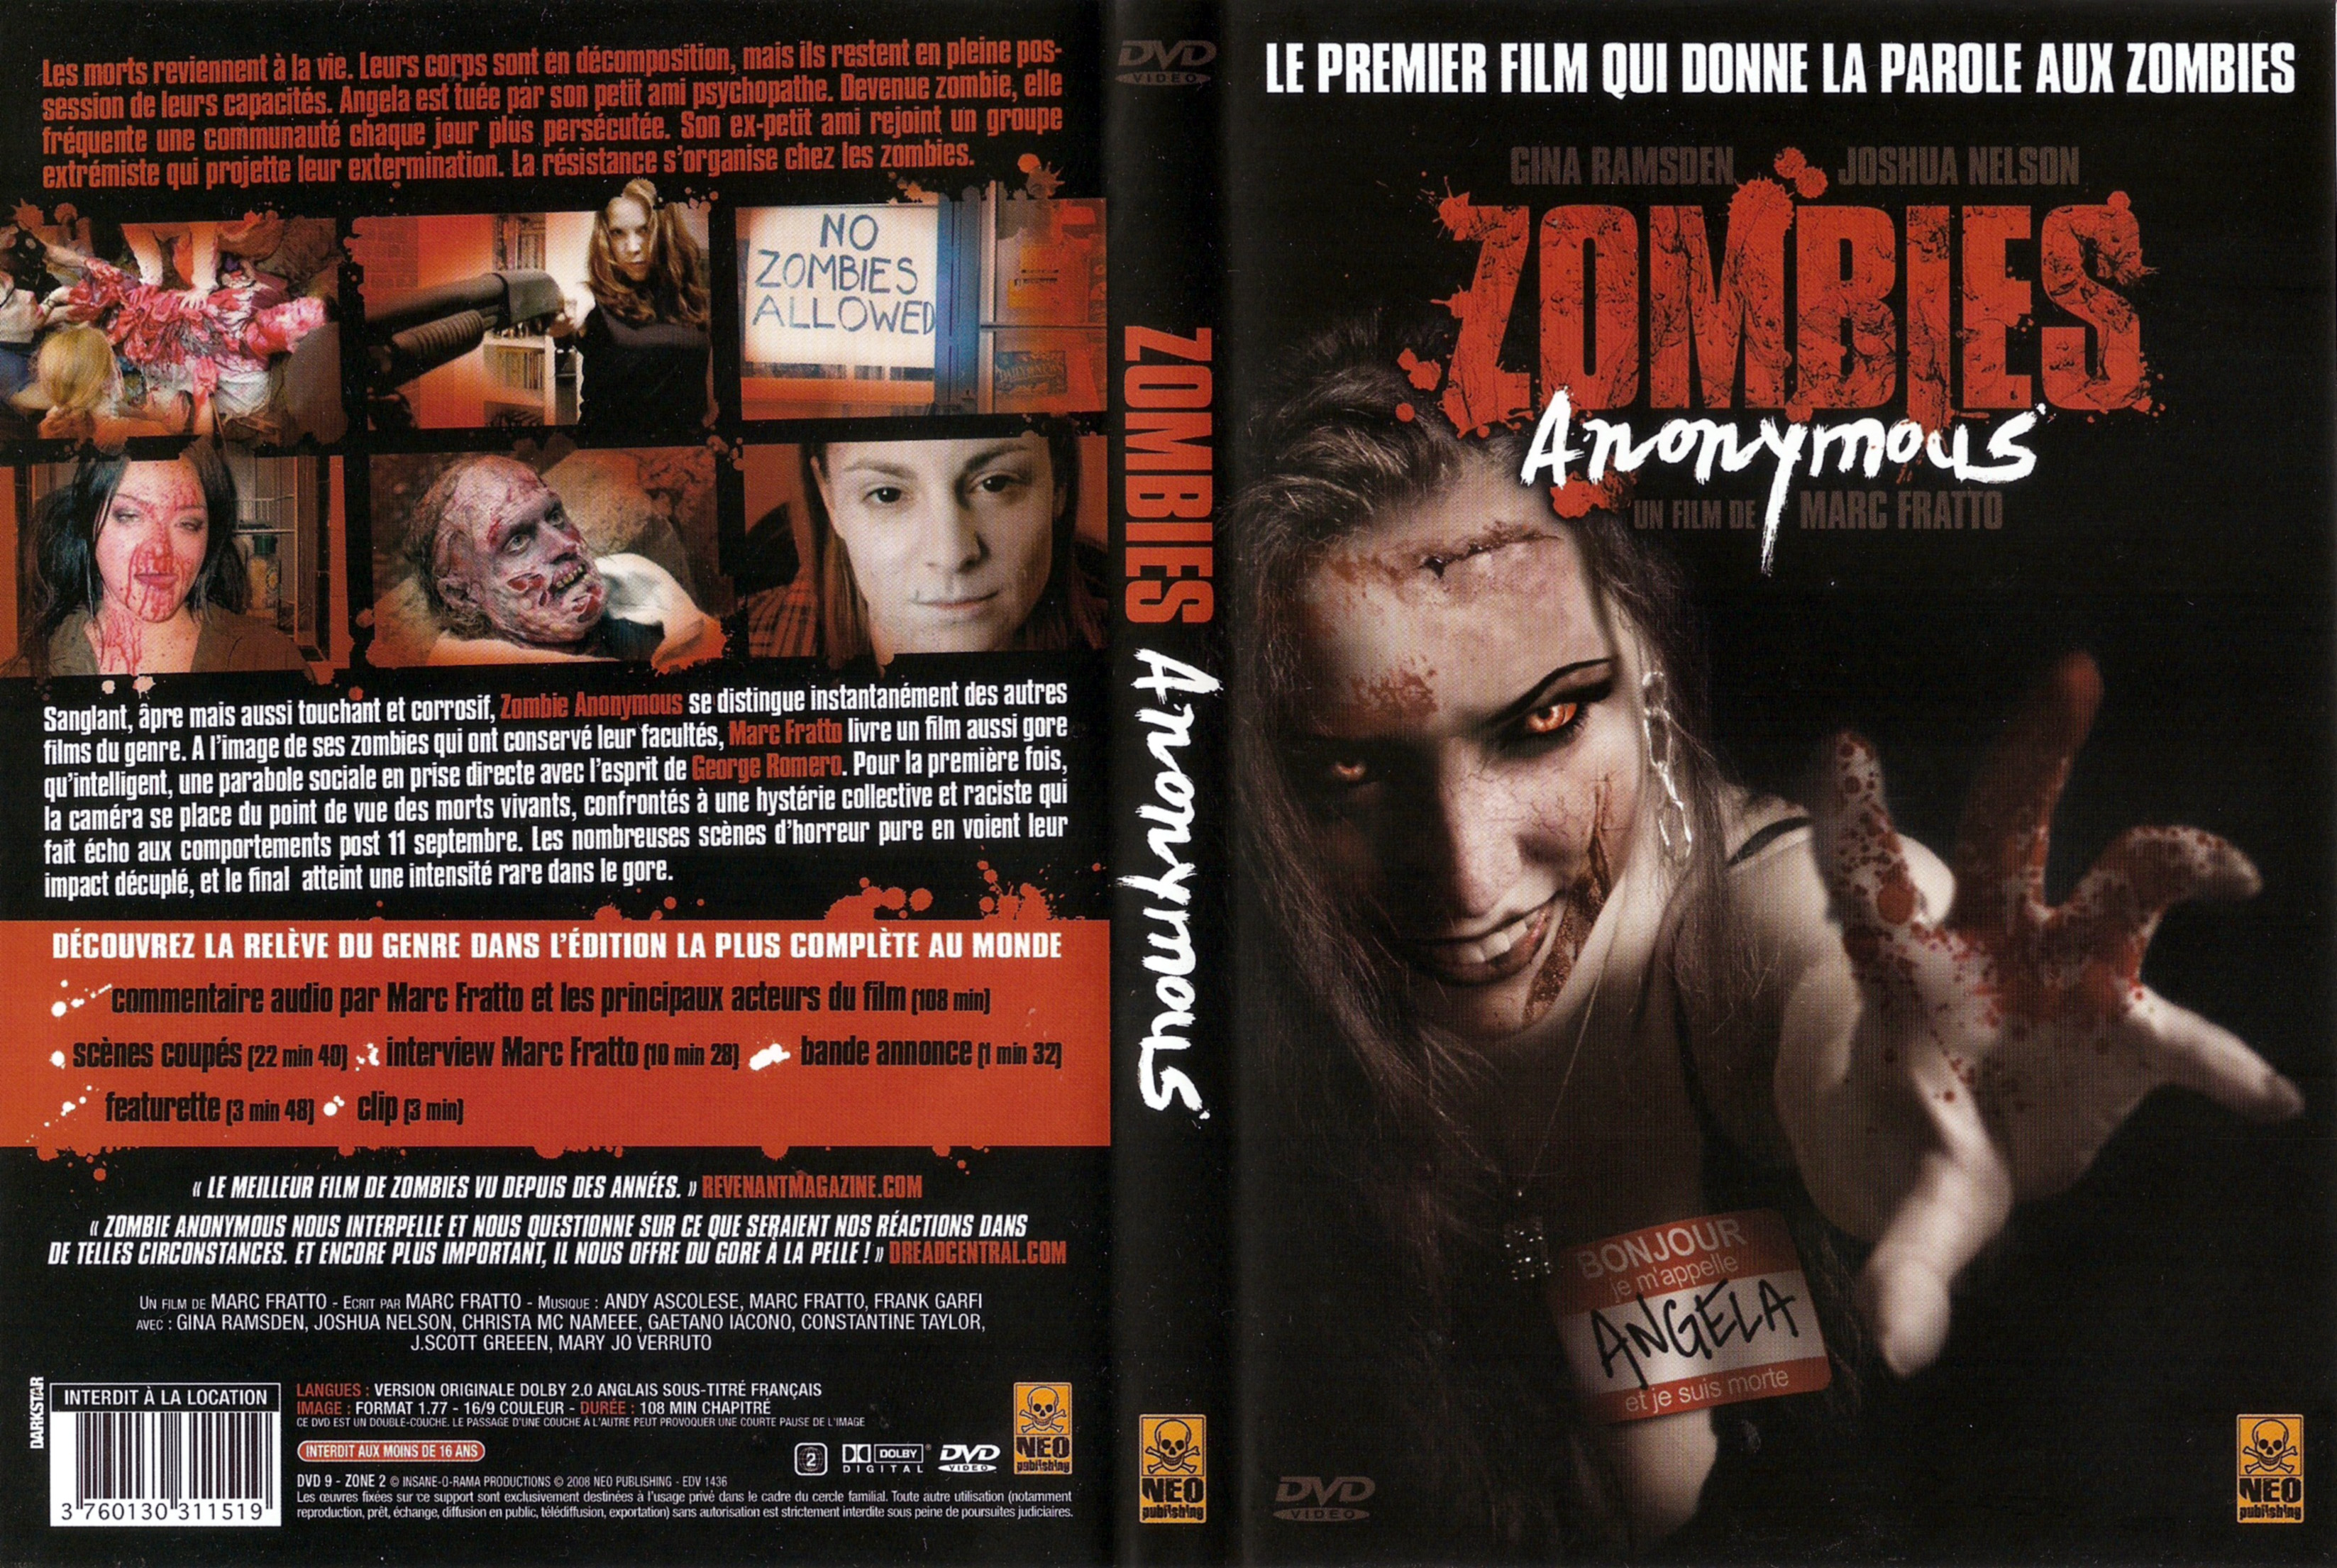 Jaquette DVD Zombies Anonymous